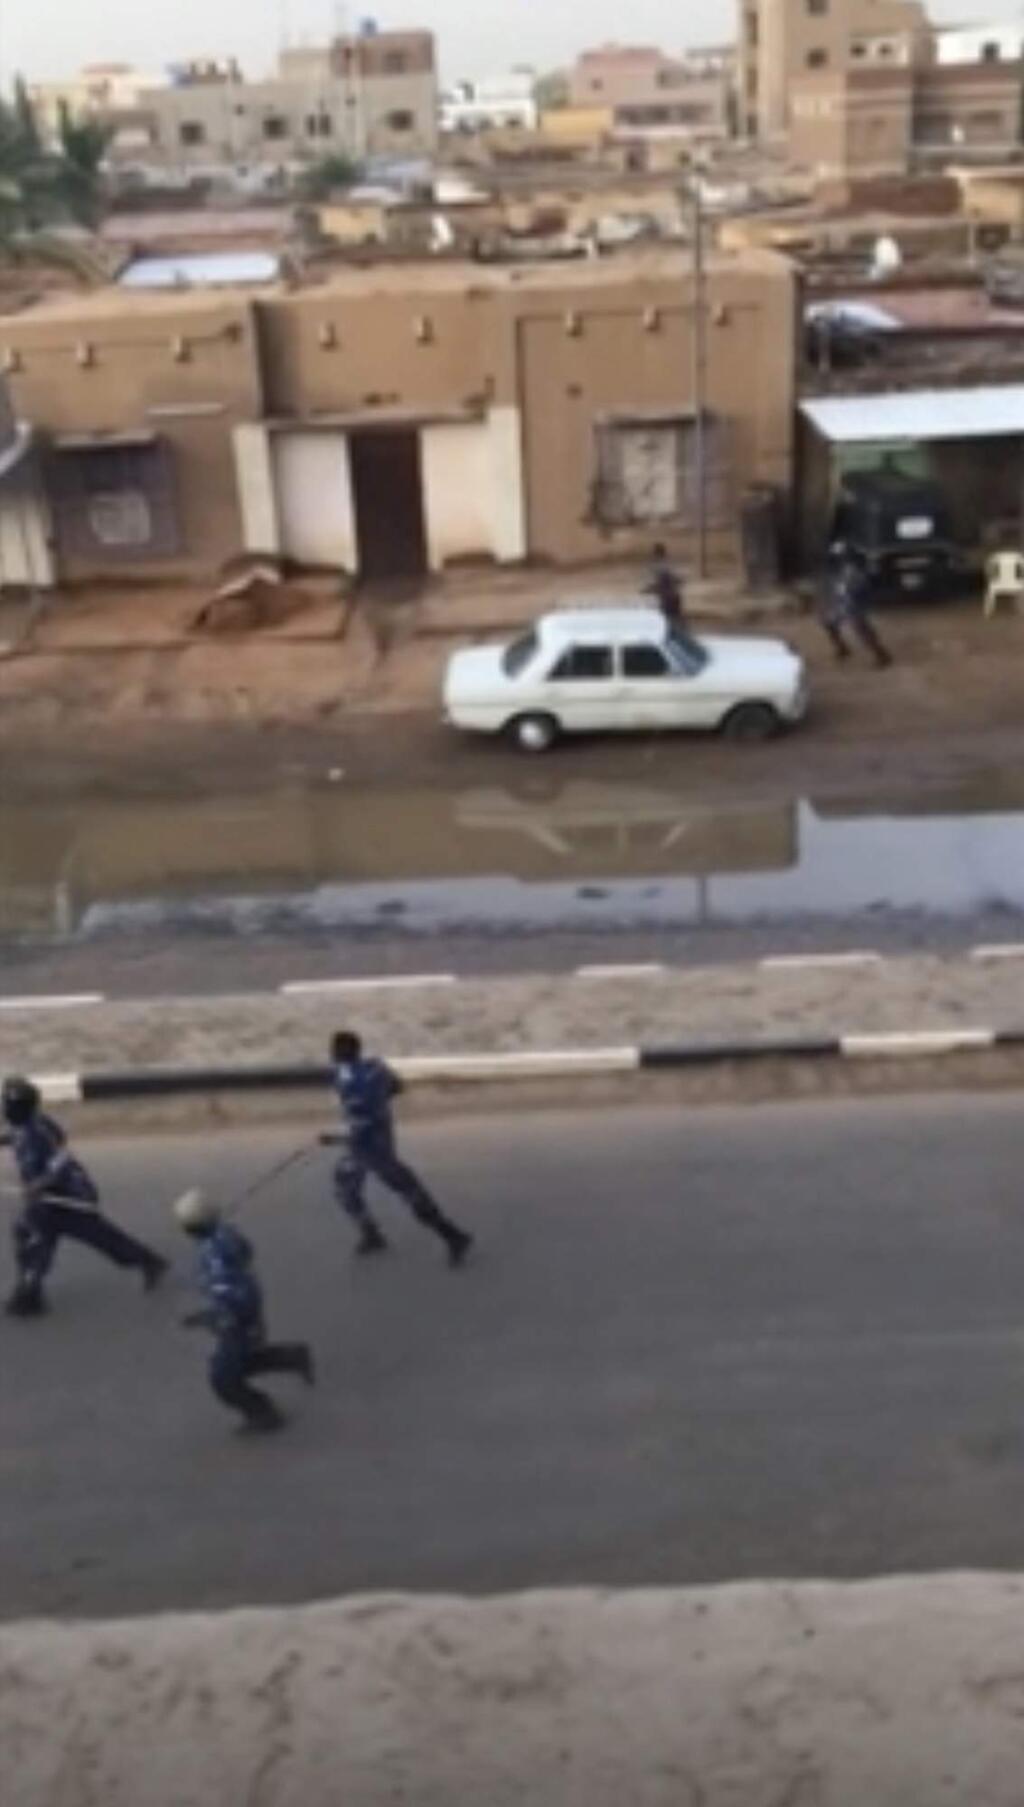 In this image made from video, Police officers running down a street in Khartoum, Sudan, on Monday, June 3, 2019. Sudanese security forces moved against a protest sit-in camp in the capital Monday, witnesses and protest organizers said. Machine gun fire and explosions were heard and smoke rose from the area. Protest organizers said at least two people were killed. (Elmontasir Darwish via AP)